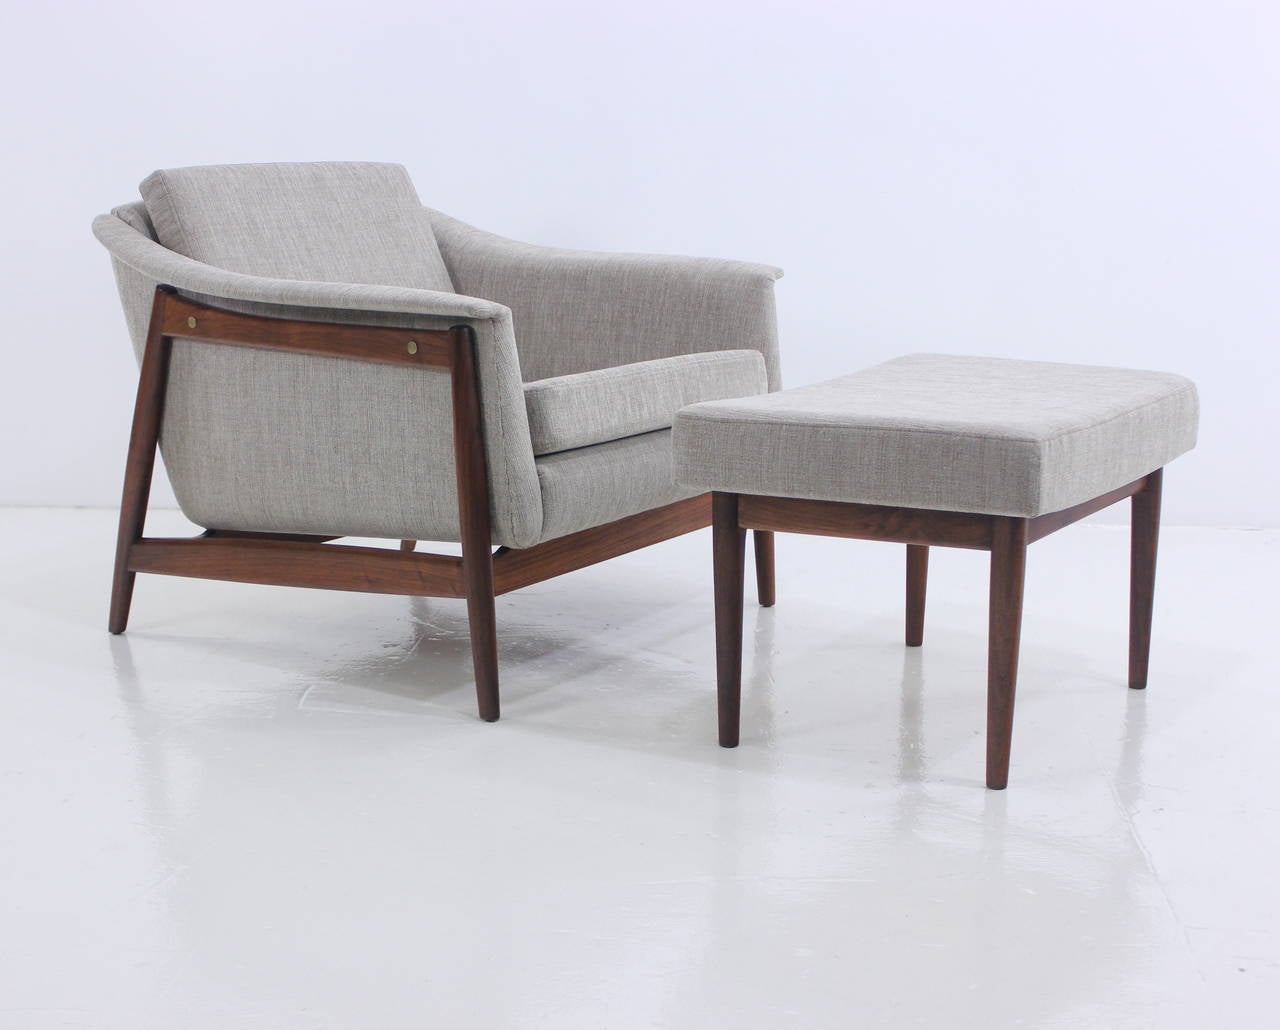 Pair of Danish modern armchairs and ottoman by DUX.
Beautifully formed walnut frames. New foam, newly upholstered in highest quality period fabric.
One ottoman measures: 25.5 W x 17.5